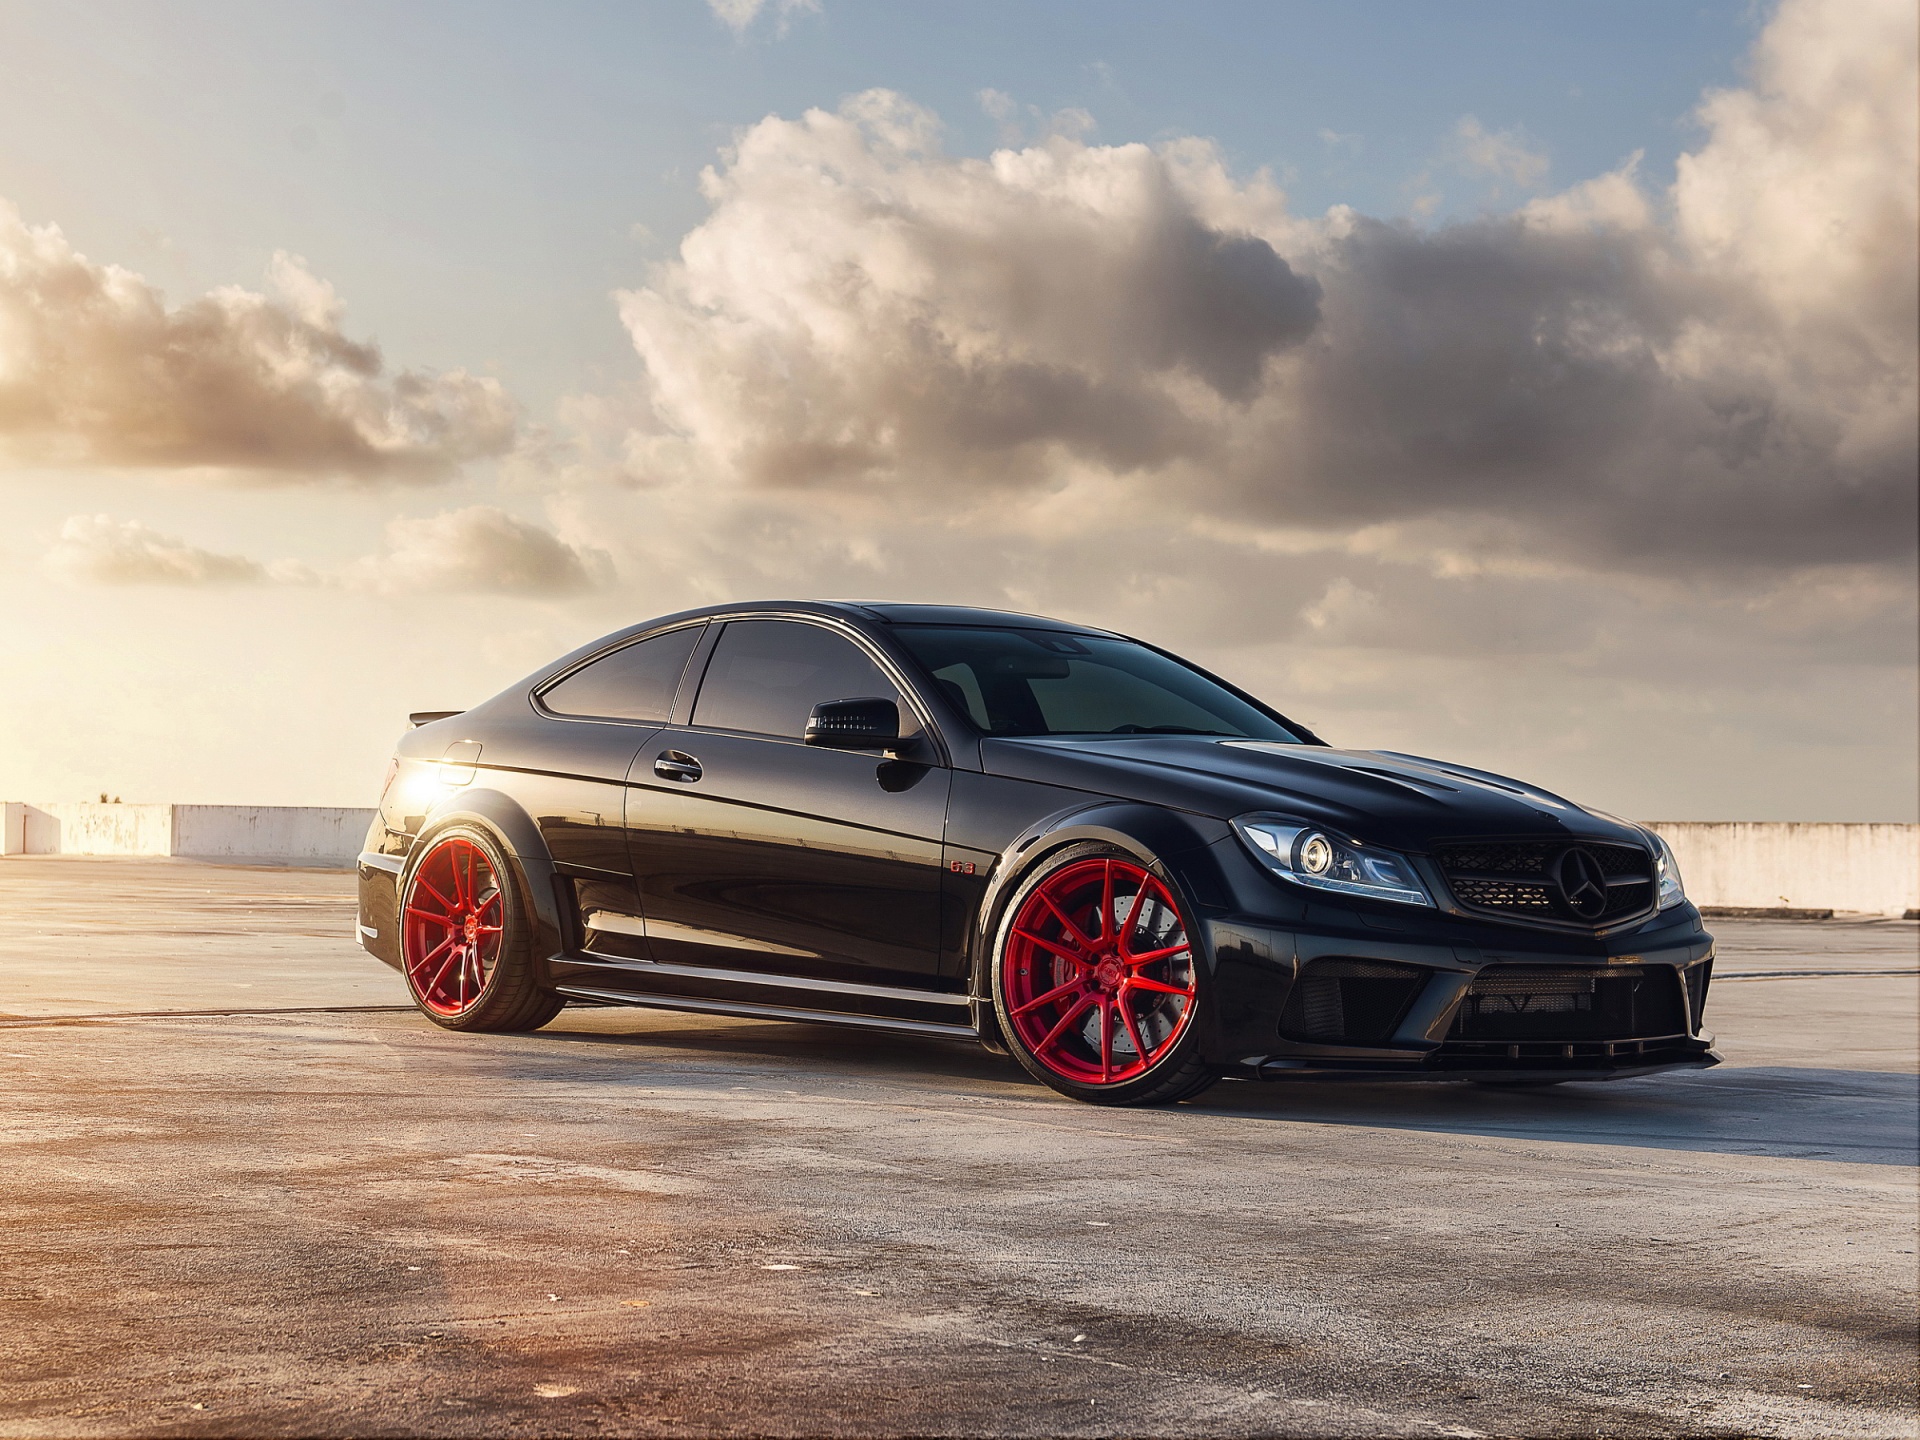 C63 amg black edition Wallpaper in 1920x1440 Normal